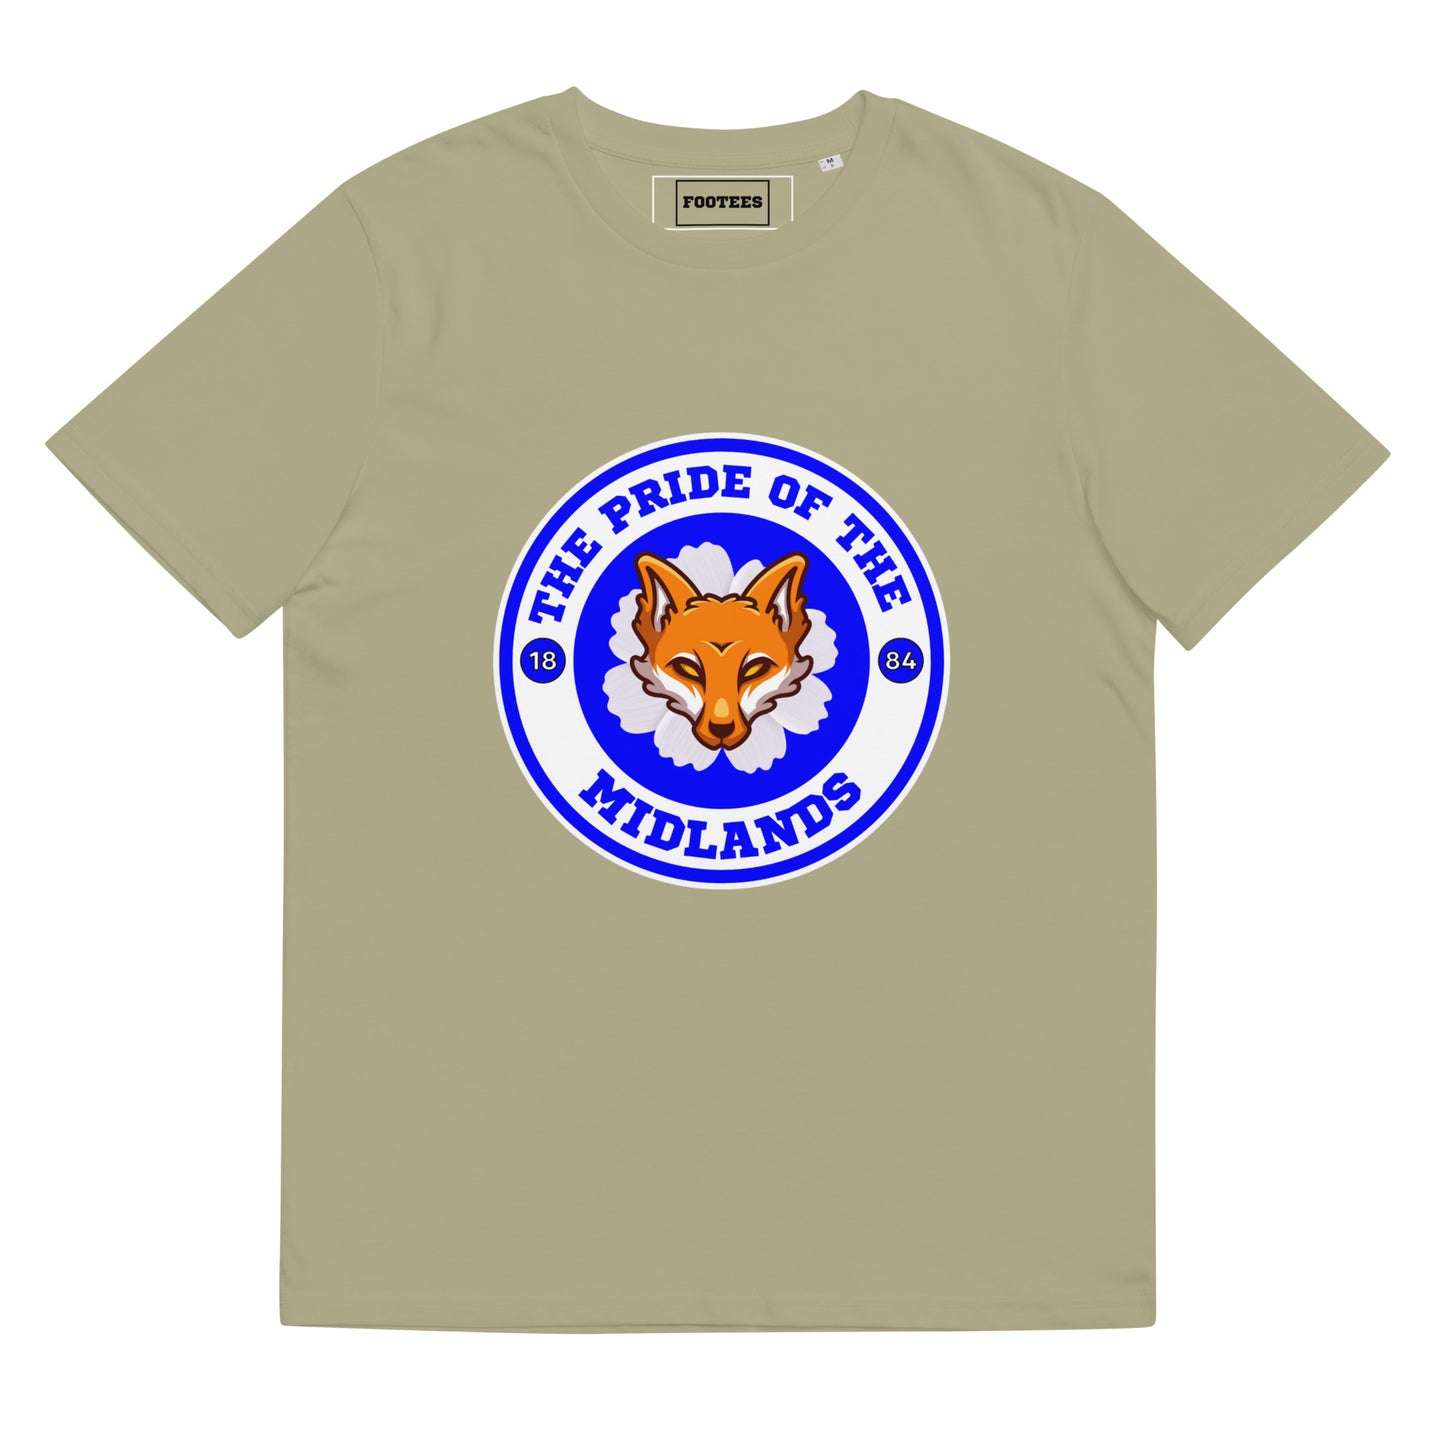 The Pride of the Midlands LCFC Tee